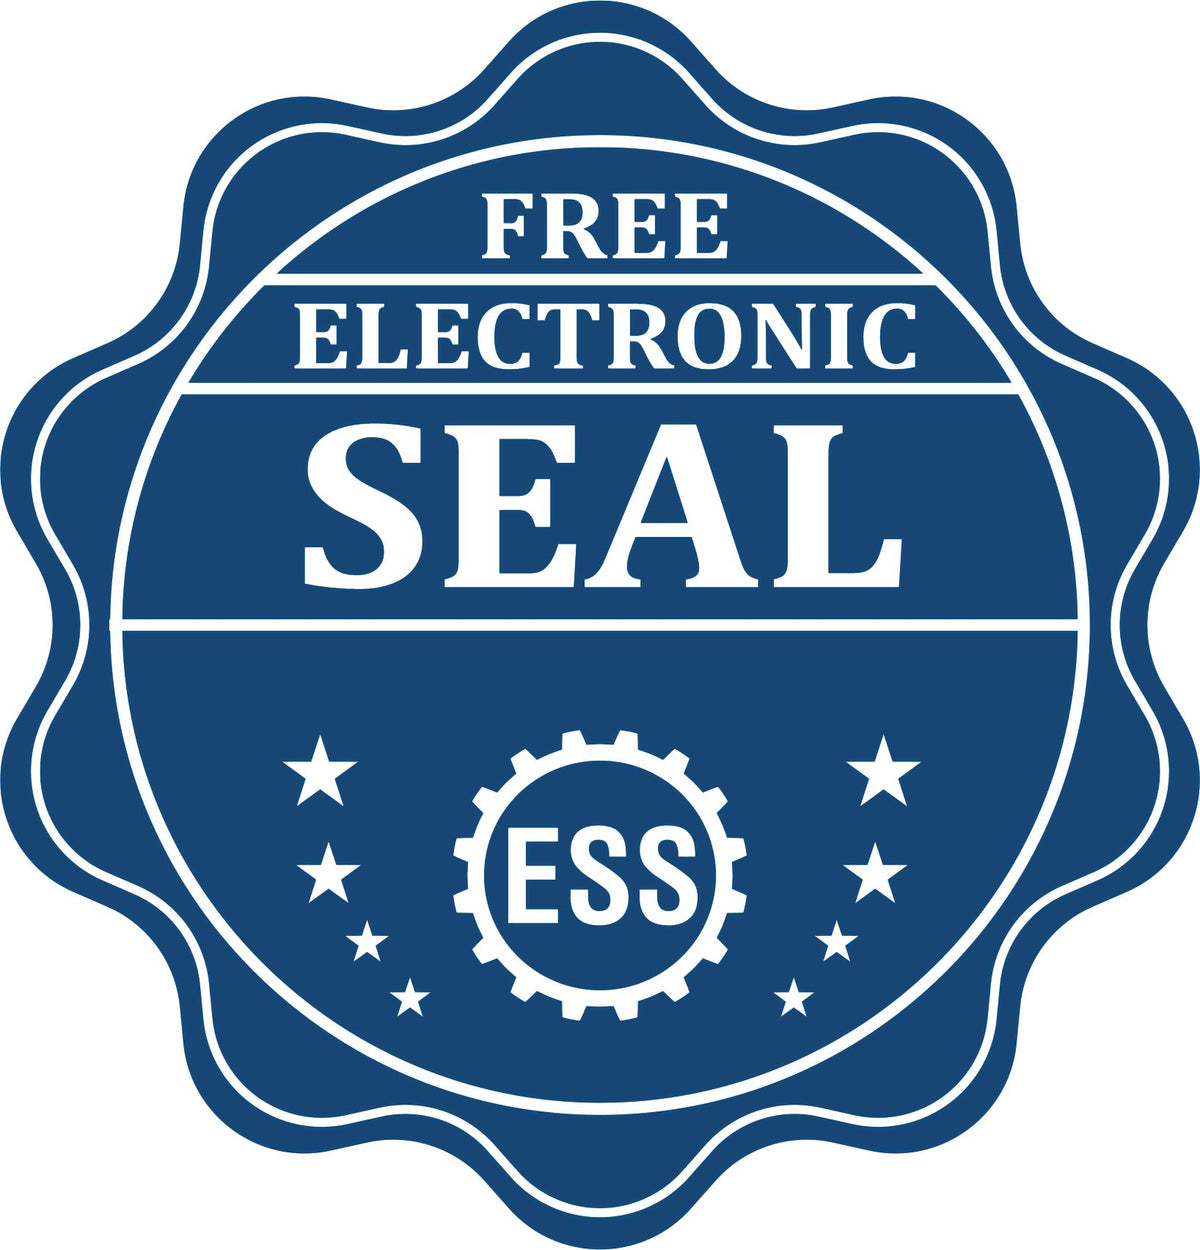 A badge showing a free electronic seal for the Gift Mississippi Land Surveyor Seal with stars and the ESS gear on the emblem.